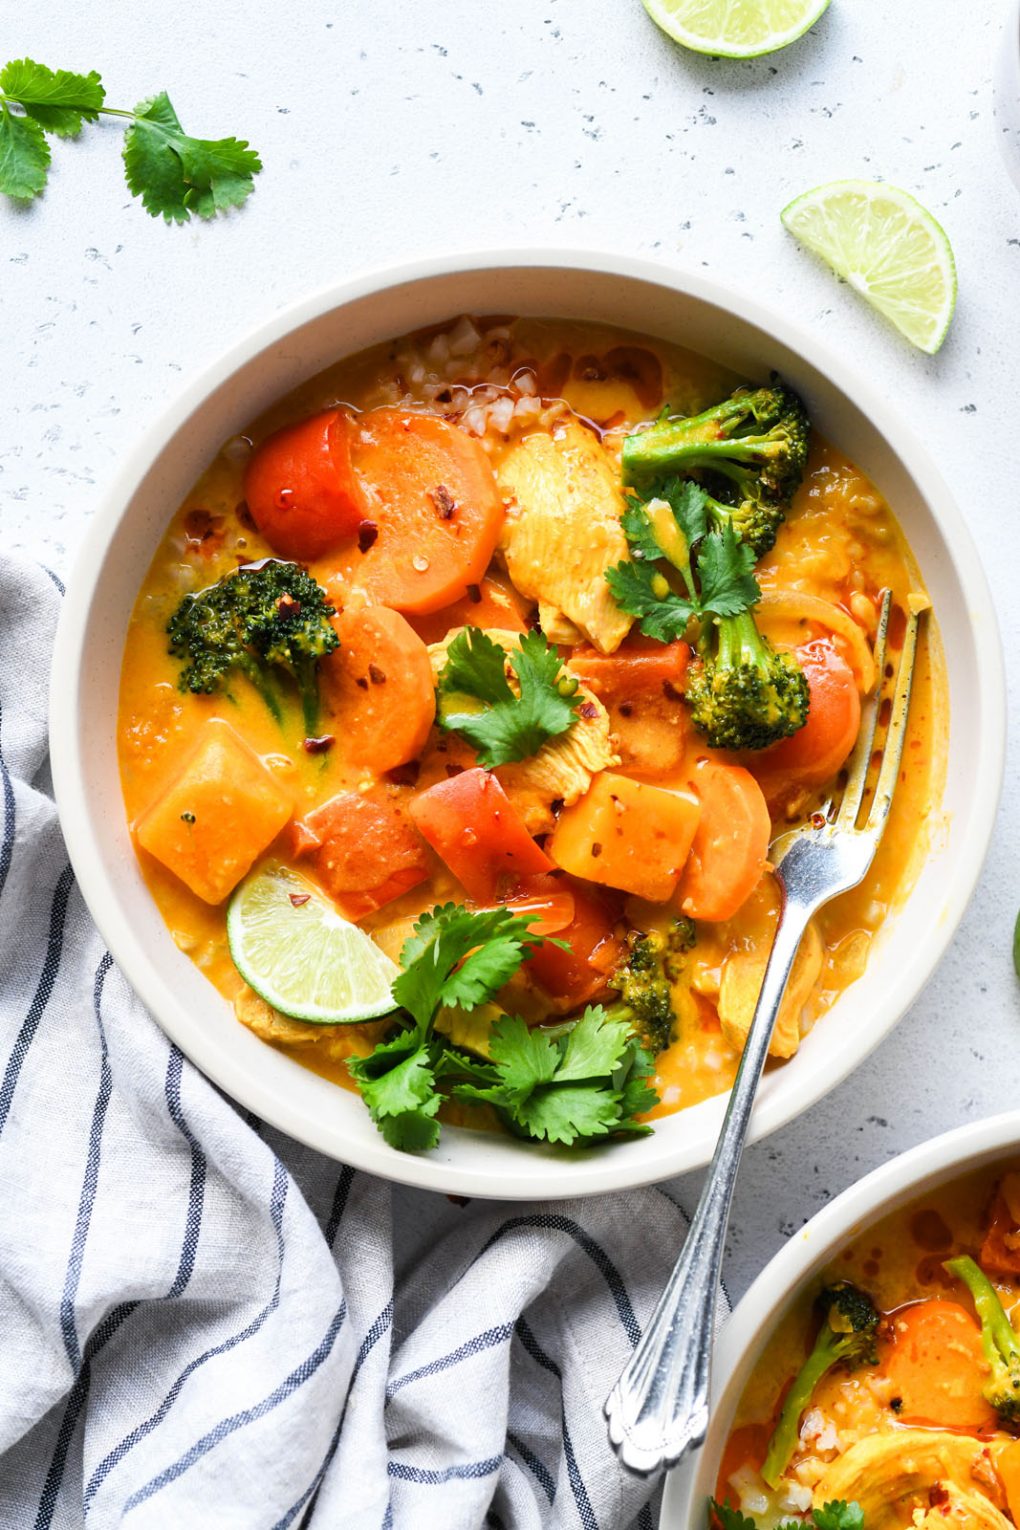 Close up overhead shot of a bright orange bowl of pumpkin curry. Brothy curry with sliced carrots, red pepper pieces, broccoli, chicken, and garnished with lime wedges and fresh cilantro. On a light colored background next to a striped napkin surrounding the bowl. 